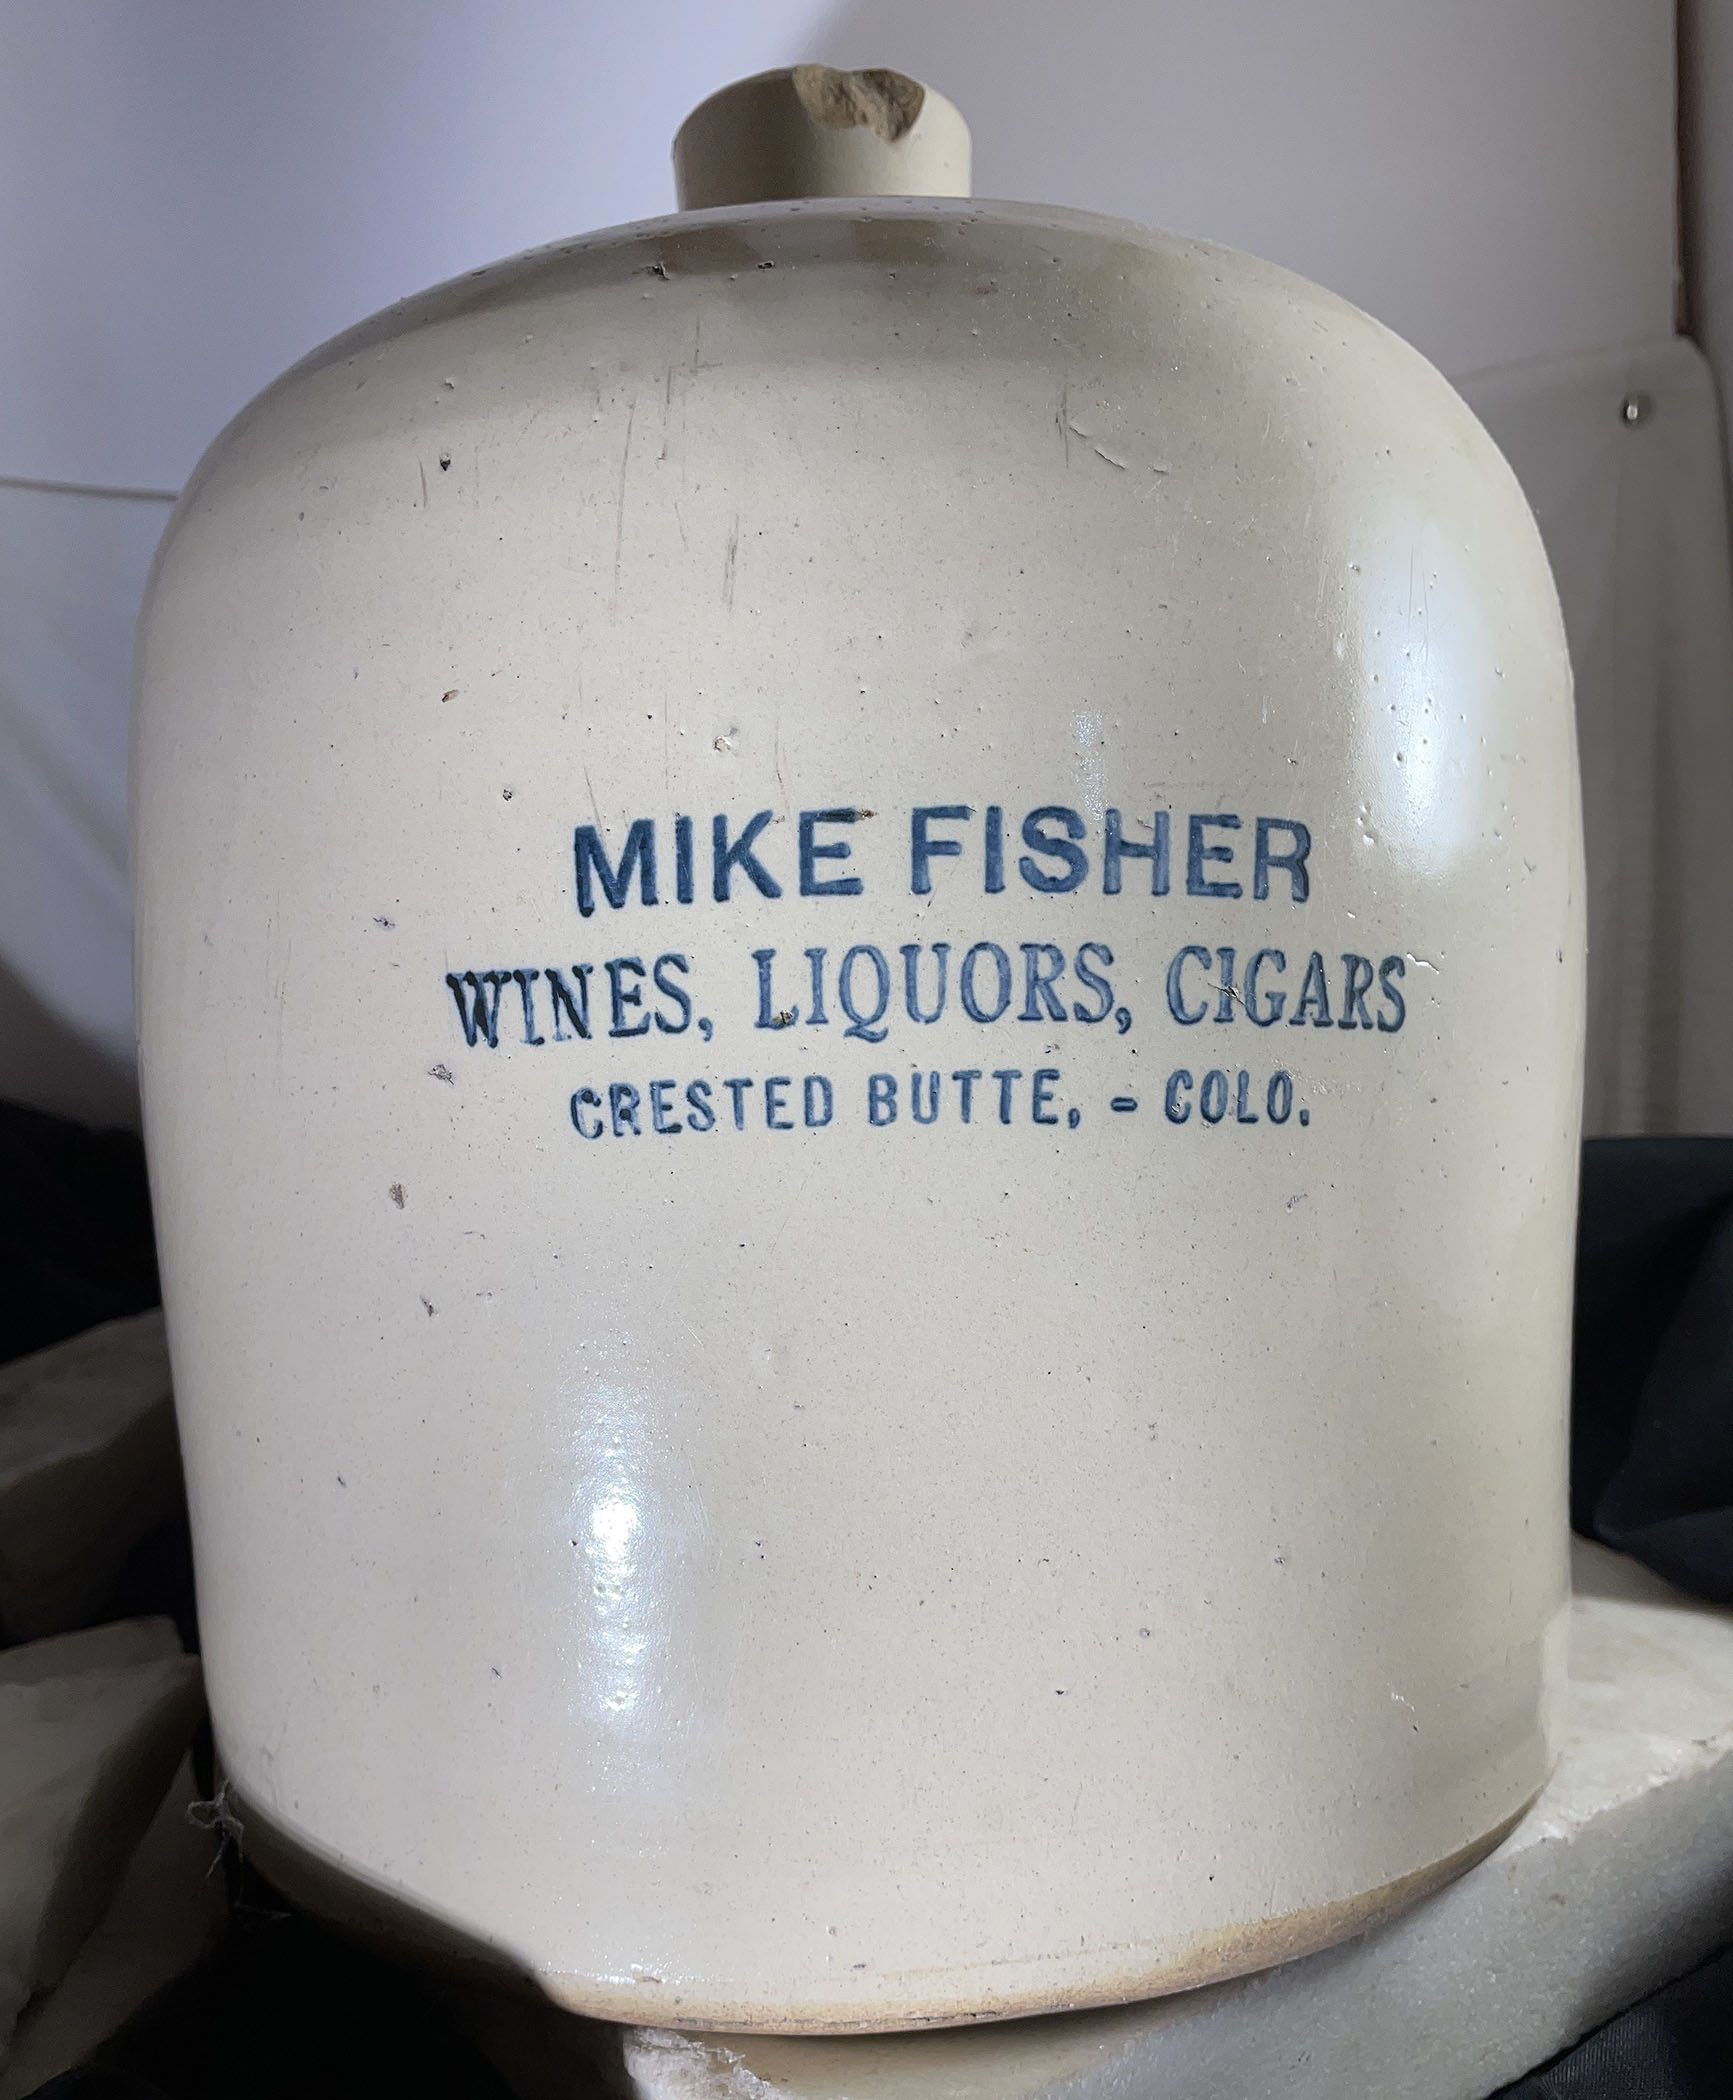 MIKE FISHER, WINES, LIQUORS, CIGARS, CRESTED BUTTE, COLORADO, Saloon whiskey jug, 1905